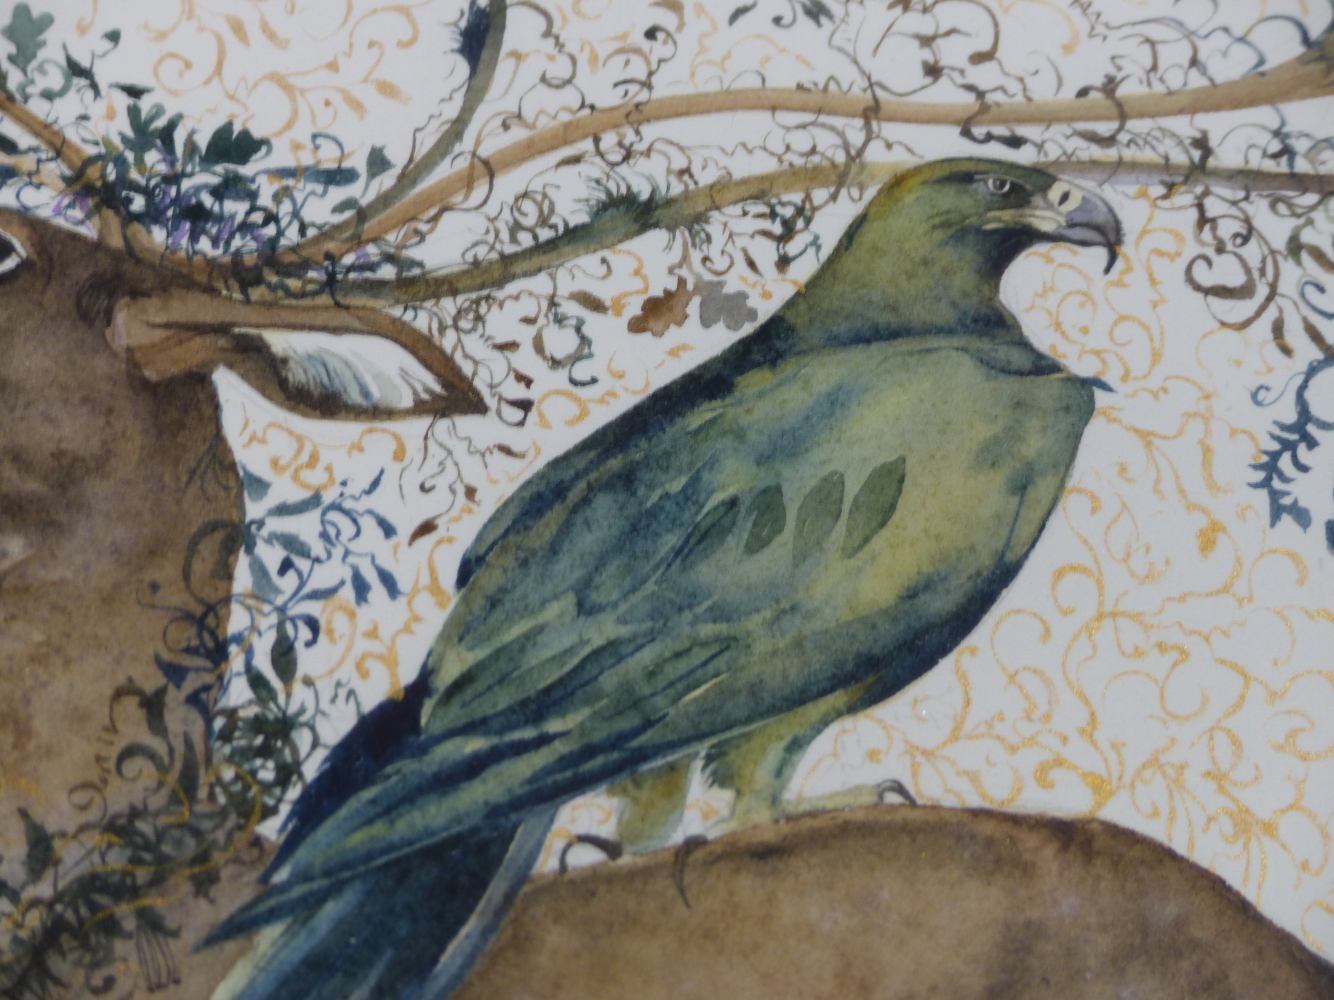 JACKIE MORRIS (20TH/21ST CENTURY) ARR, STAG AND EAGLE, WATERCOLOUR HIGHLIGHTED WITH GILT, 24.5 x - Image 8 of 8